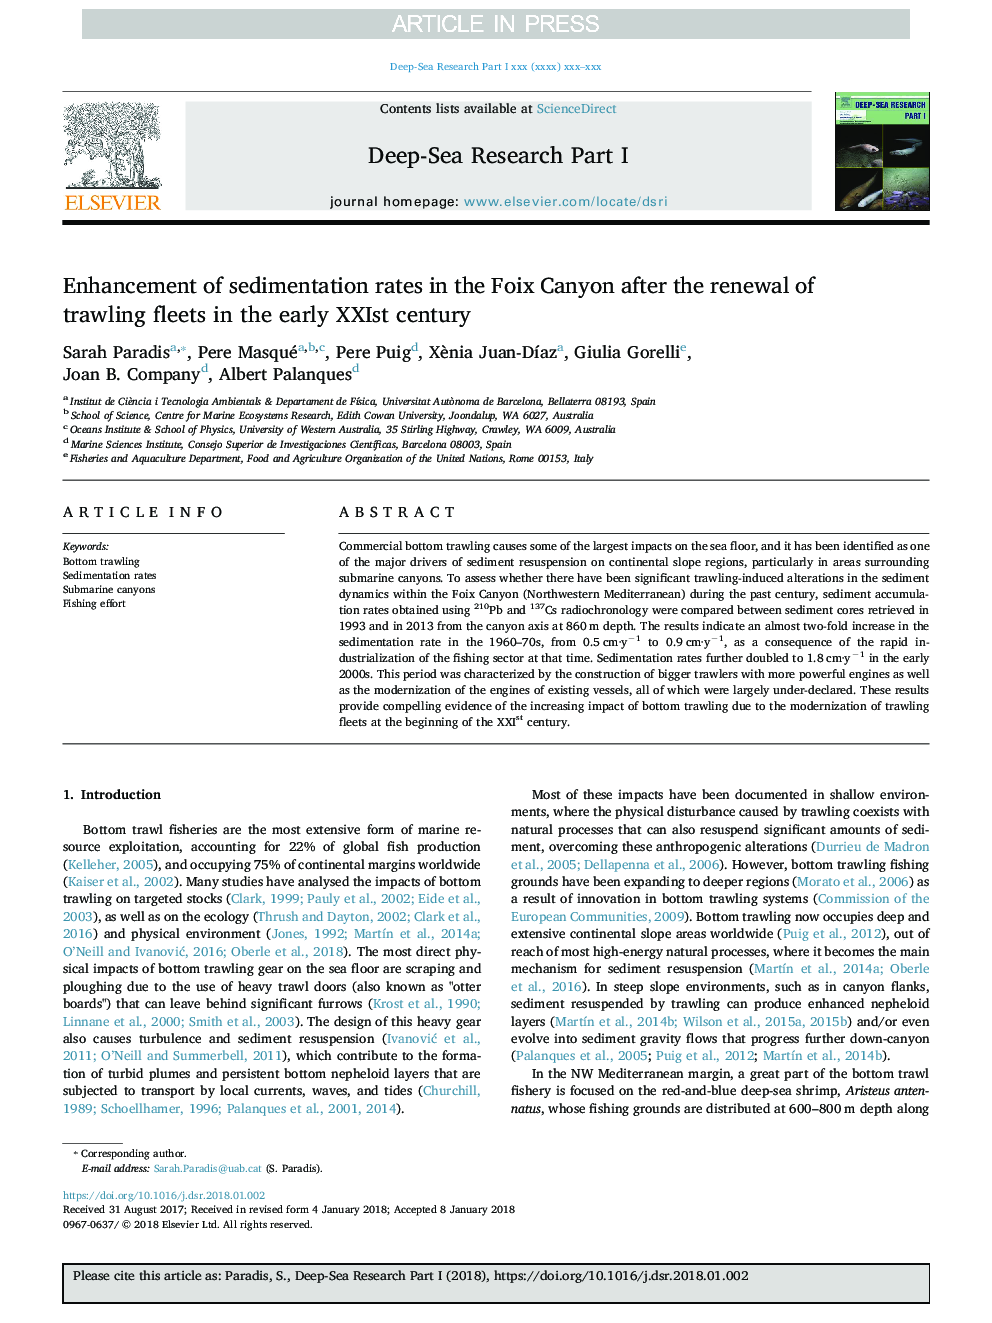 Enhancement of sedimentation rates in the Foix Canyon after the renewal of trawling fleets in the early XXIst century